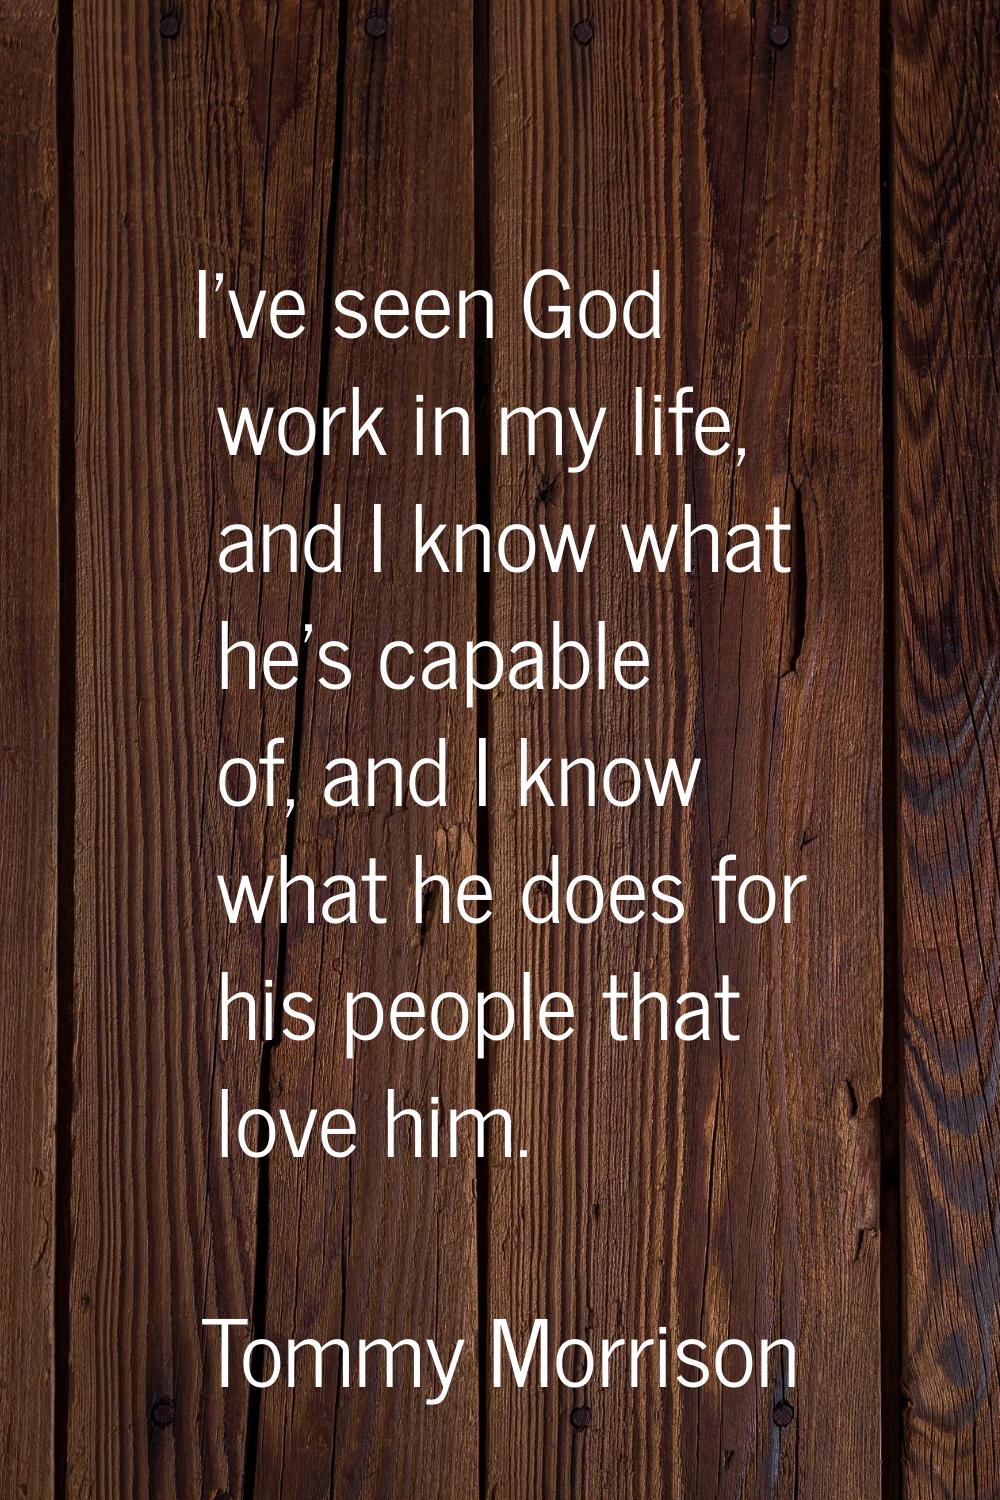 I've seen God work in my life, and I know what he's capable of, and I know what he does for his peo